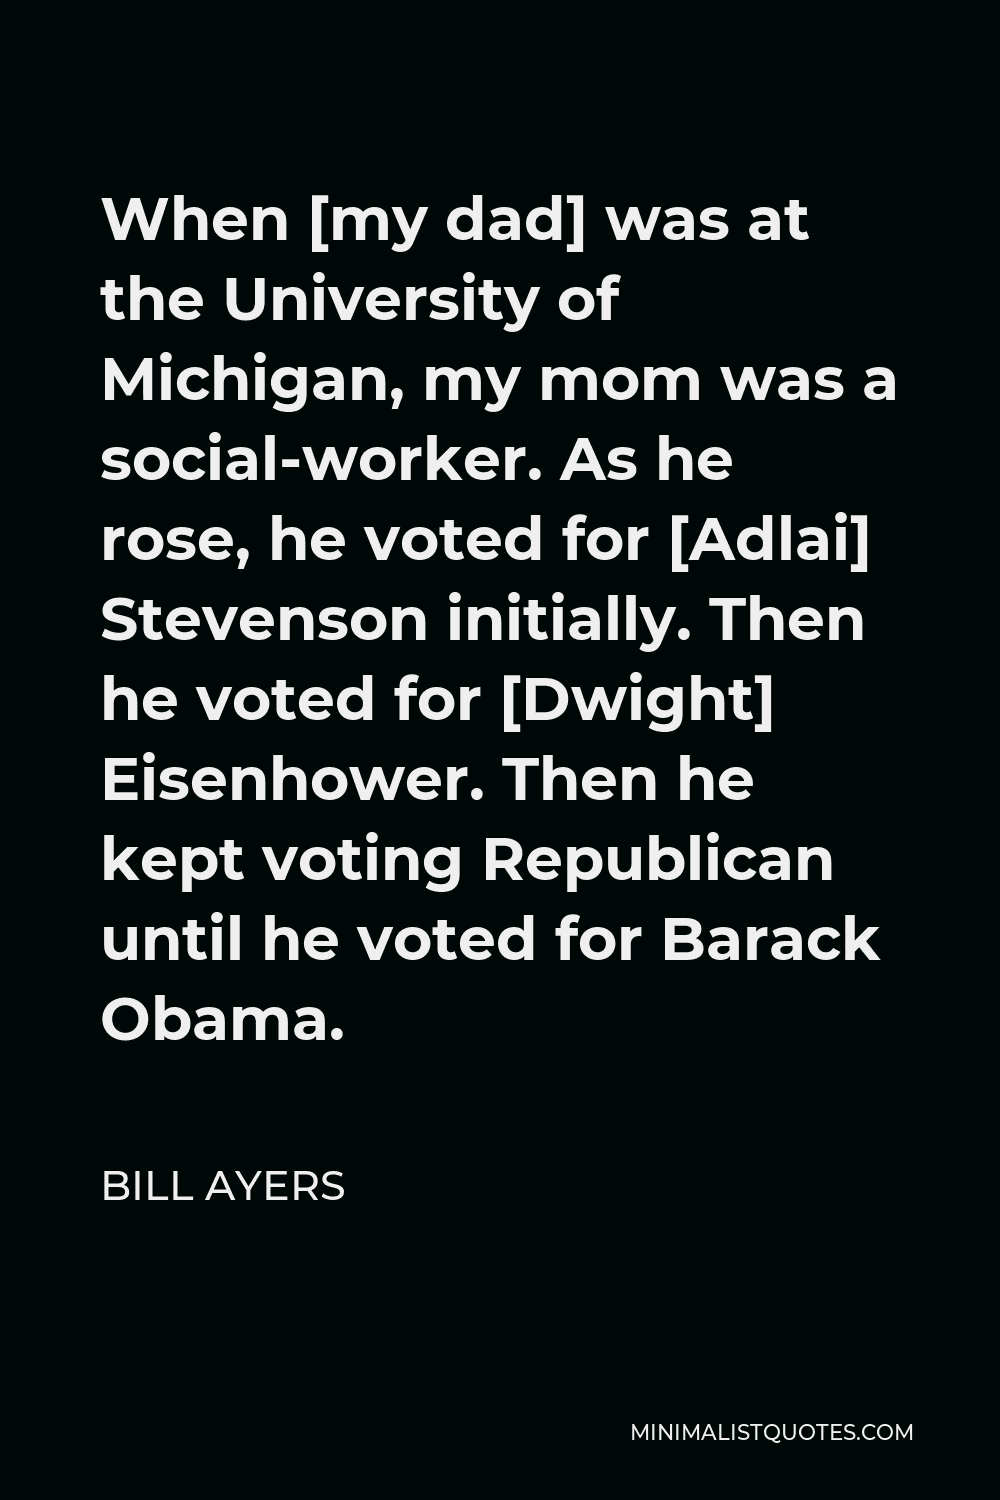 Bill Ayers Quote - When [my dad] was at the University of Michigan, my mom was a social-worker. As he rose, he voted for [Adlai] Stevenson initially. Then he voted for [Dwight] Eisenhower. Then he kept voting Republican until he voted for Barack Obama.